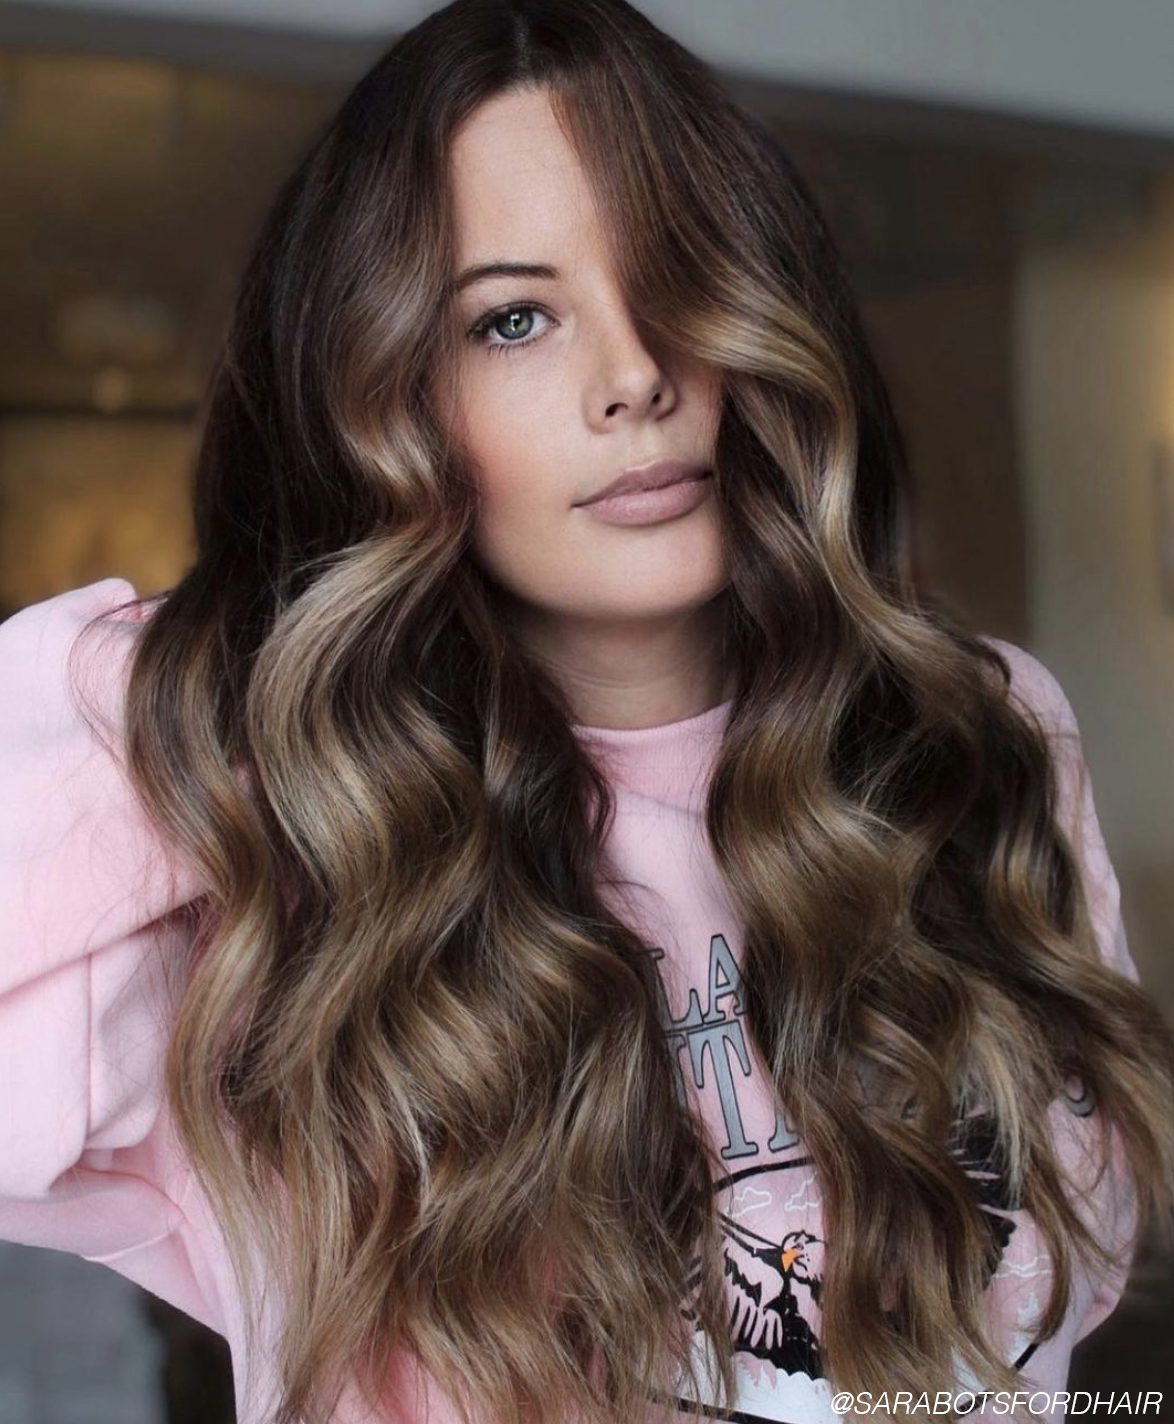 Curling Iron Techniques To Create 3 Different Waves - Bangstyle - House of  Hair Inspiration